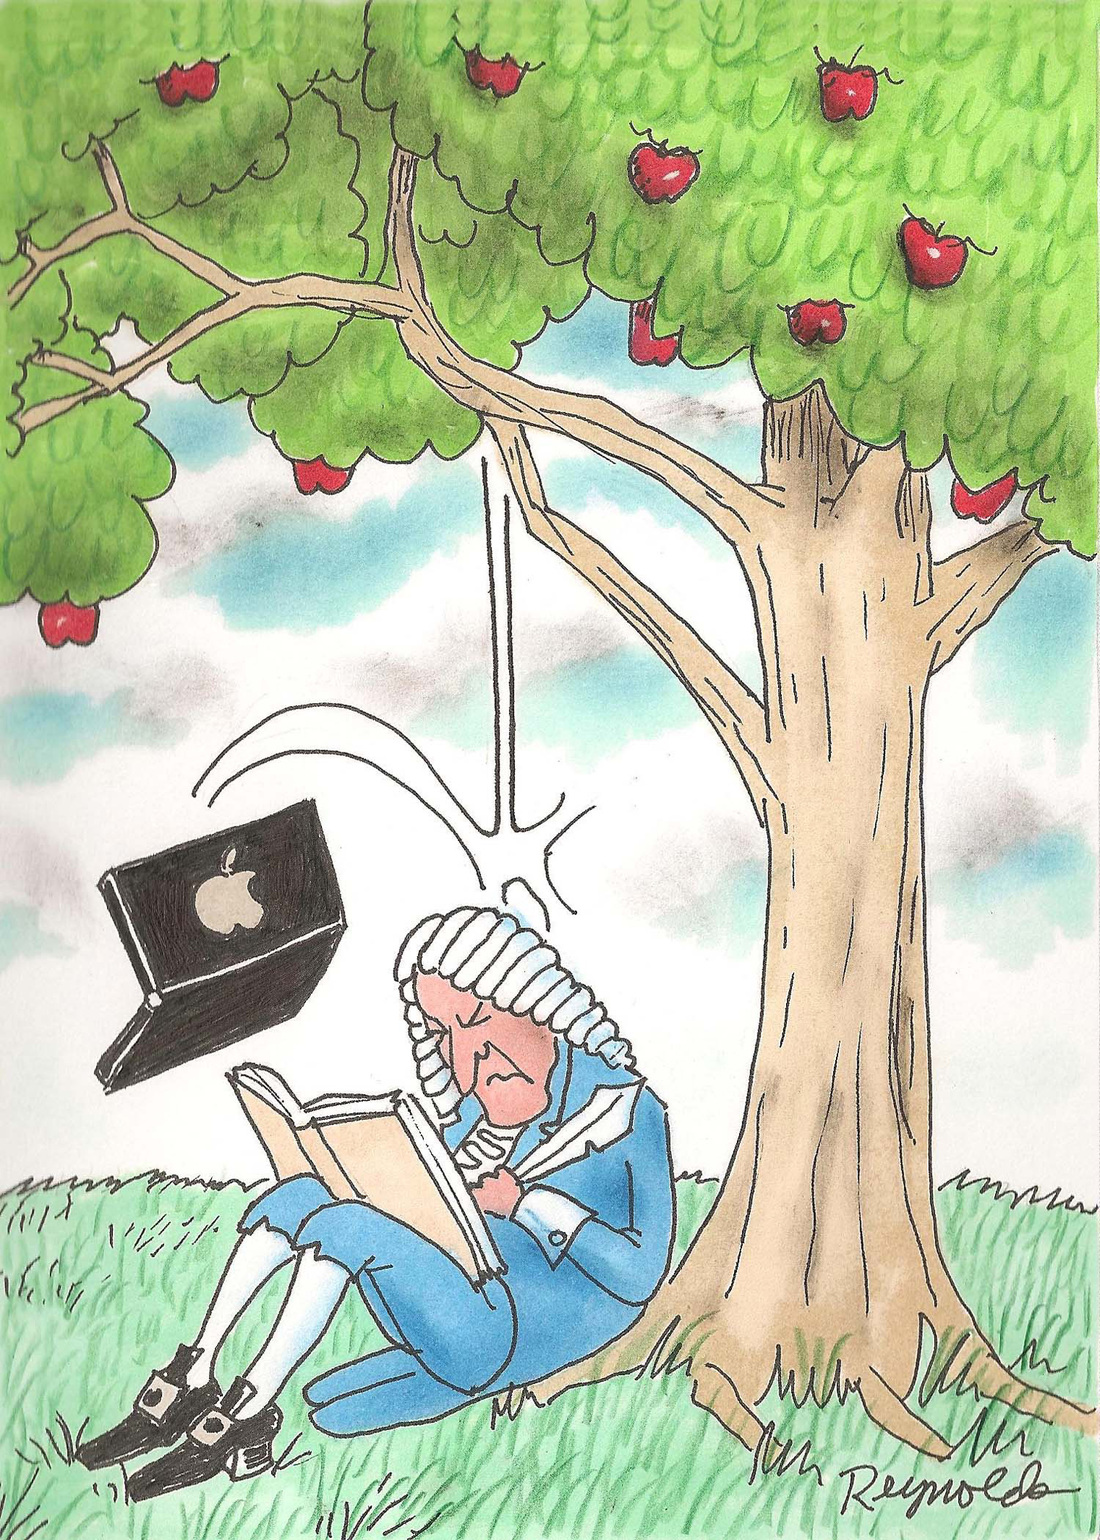 newtons laws of motion apple